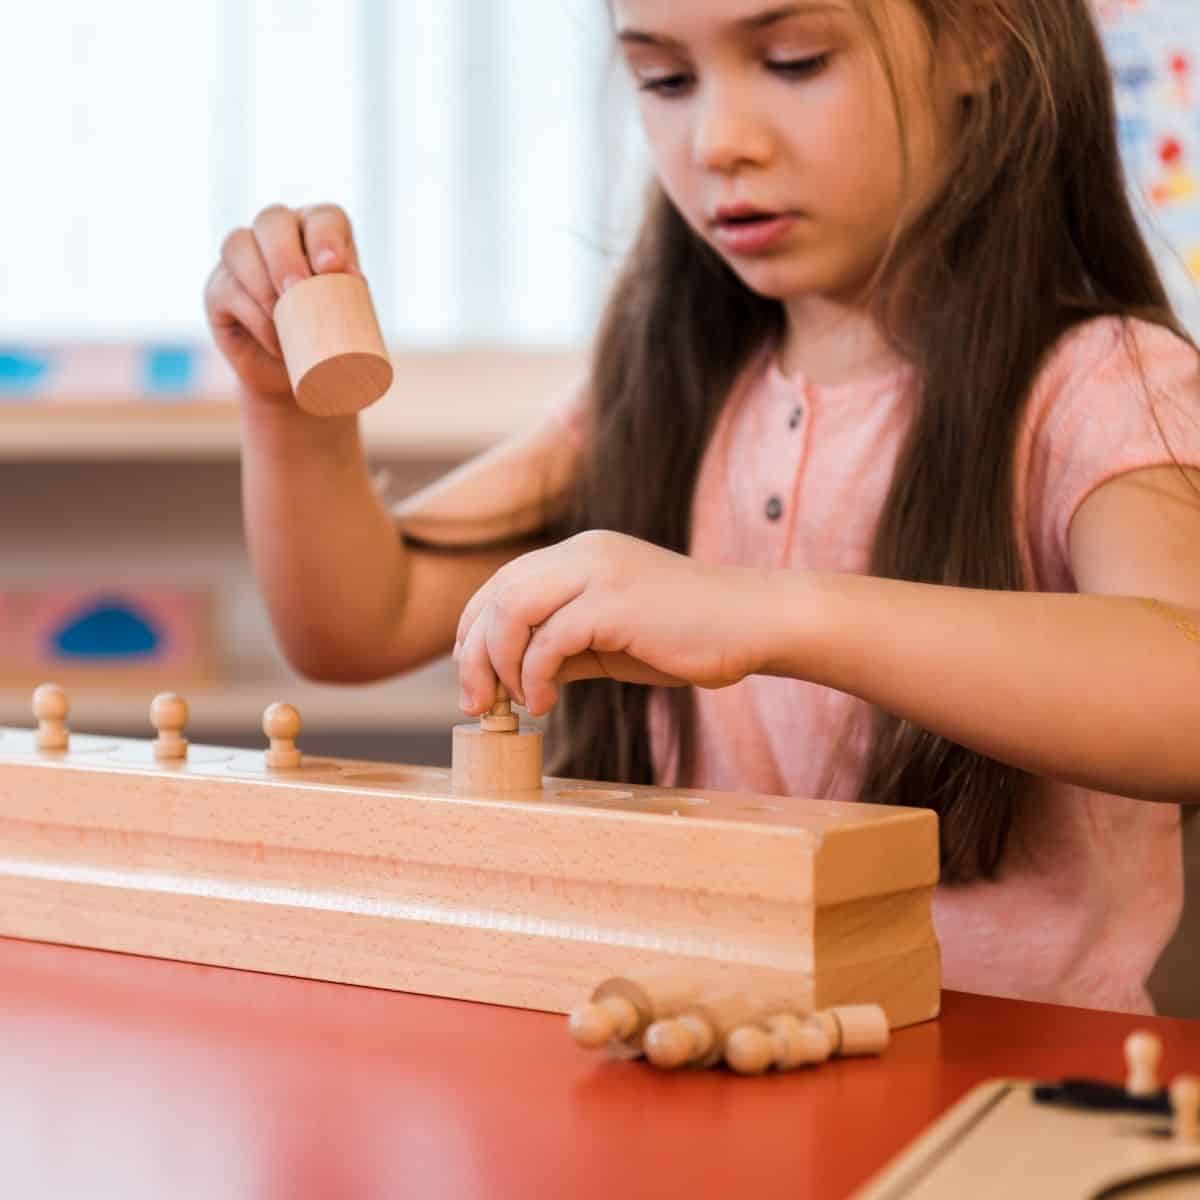 Learn what sensory self regulation is, why it matters, and what sensory strategies improve self regulation skills in kids that have sensory "issues" or difficulties.  